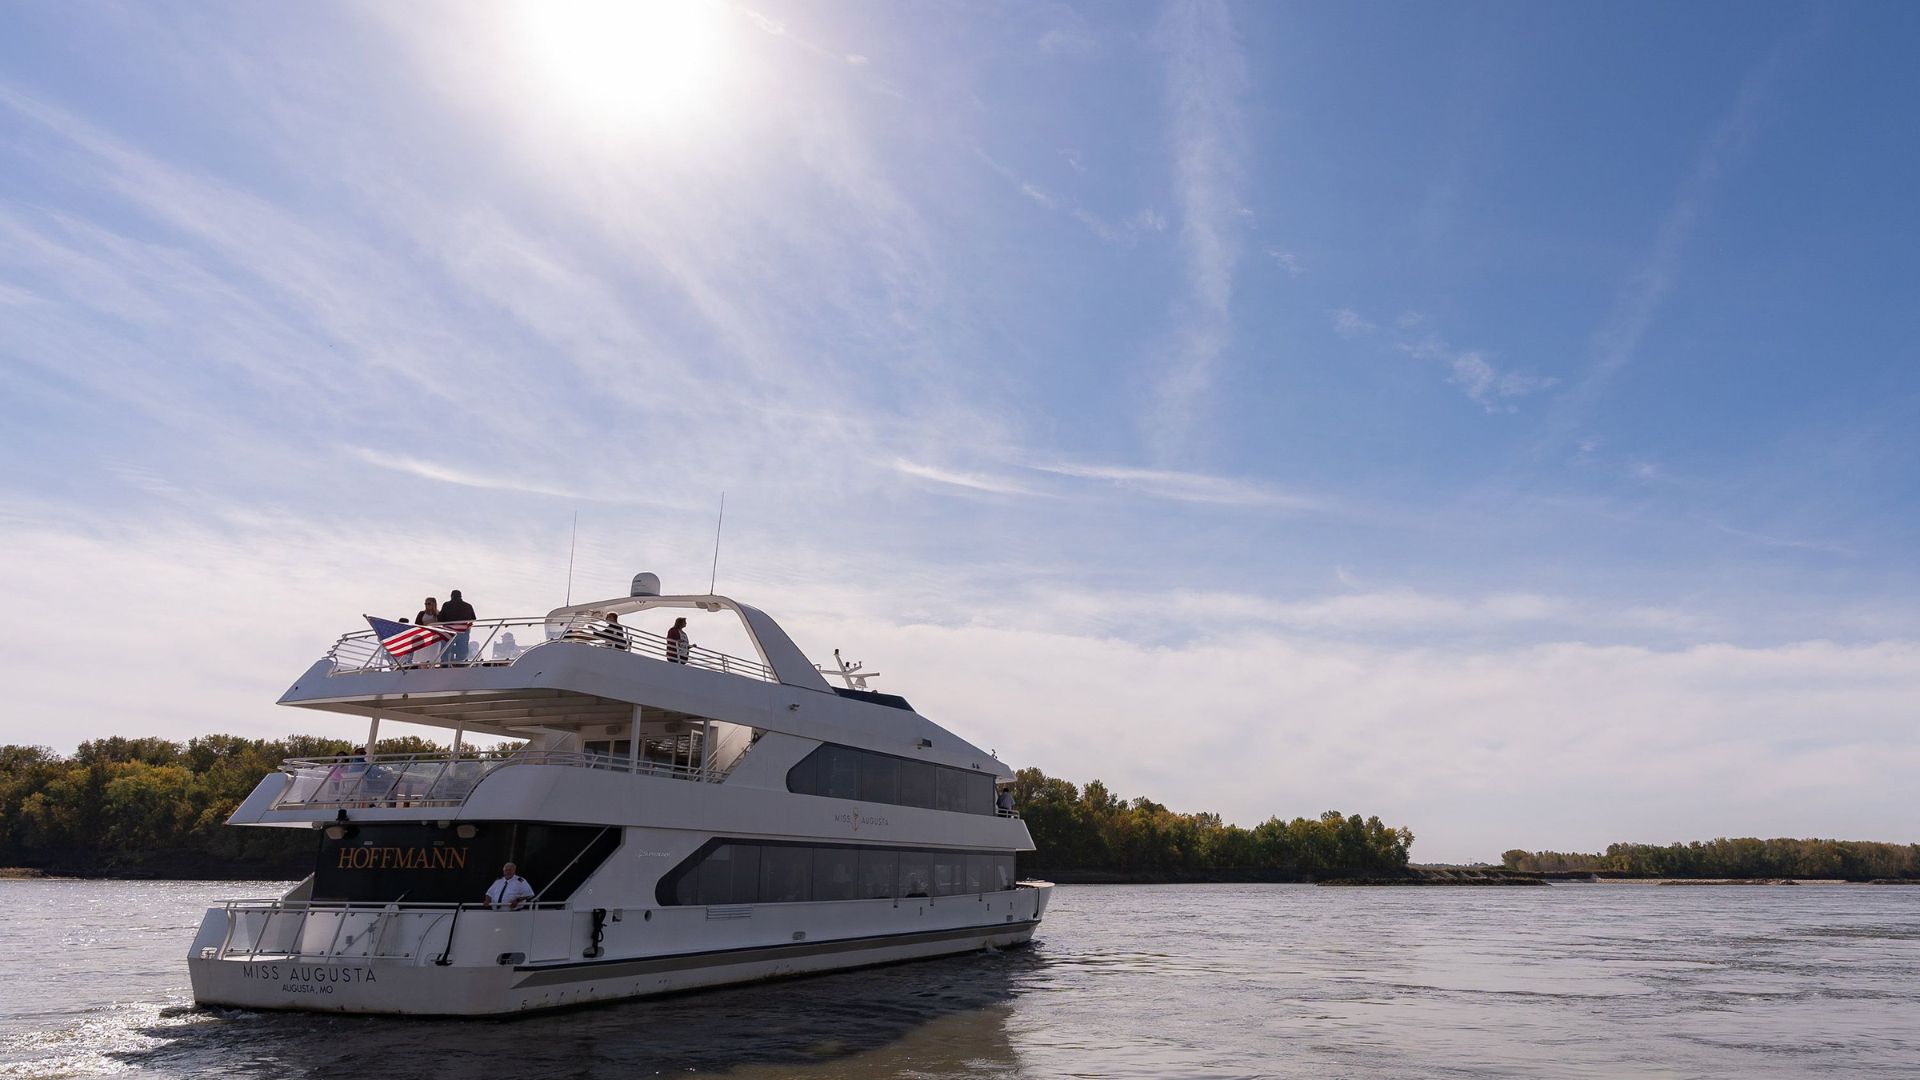 Miss Augusta, a luxury yacht, offers daily cruises on the Missouri River.